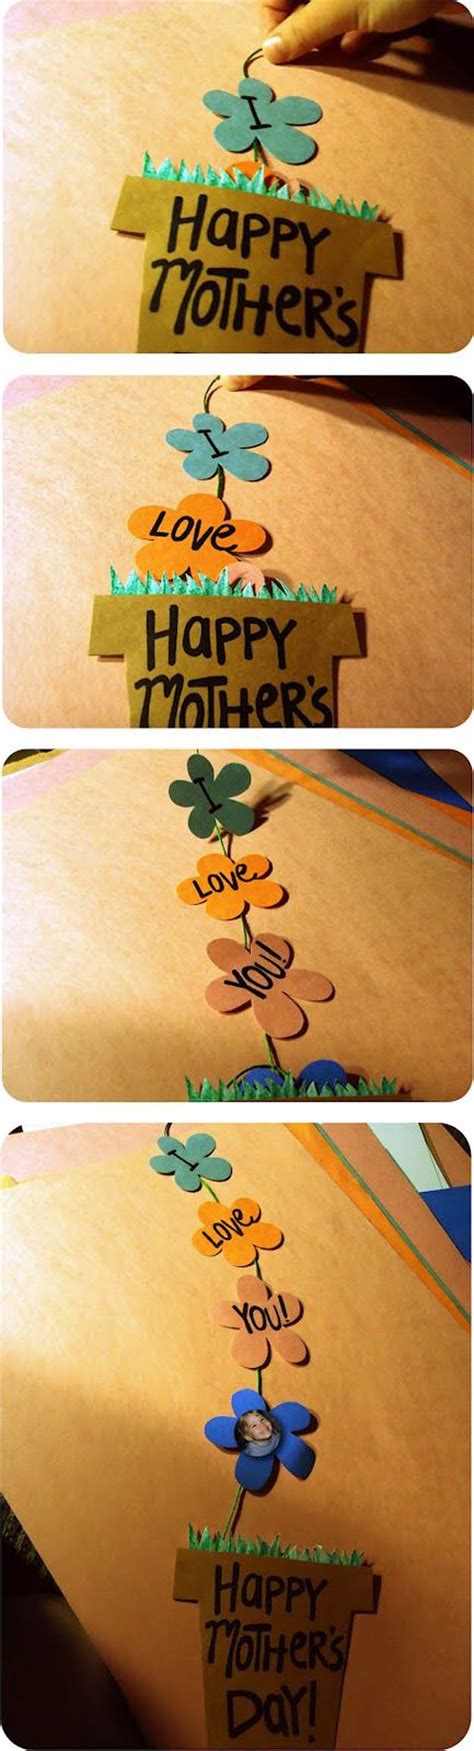 I made three yesterday and two more this morning. 15 Beautiful Handmade Mother's Day Cards | DIY Ready